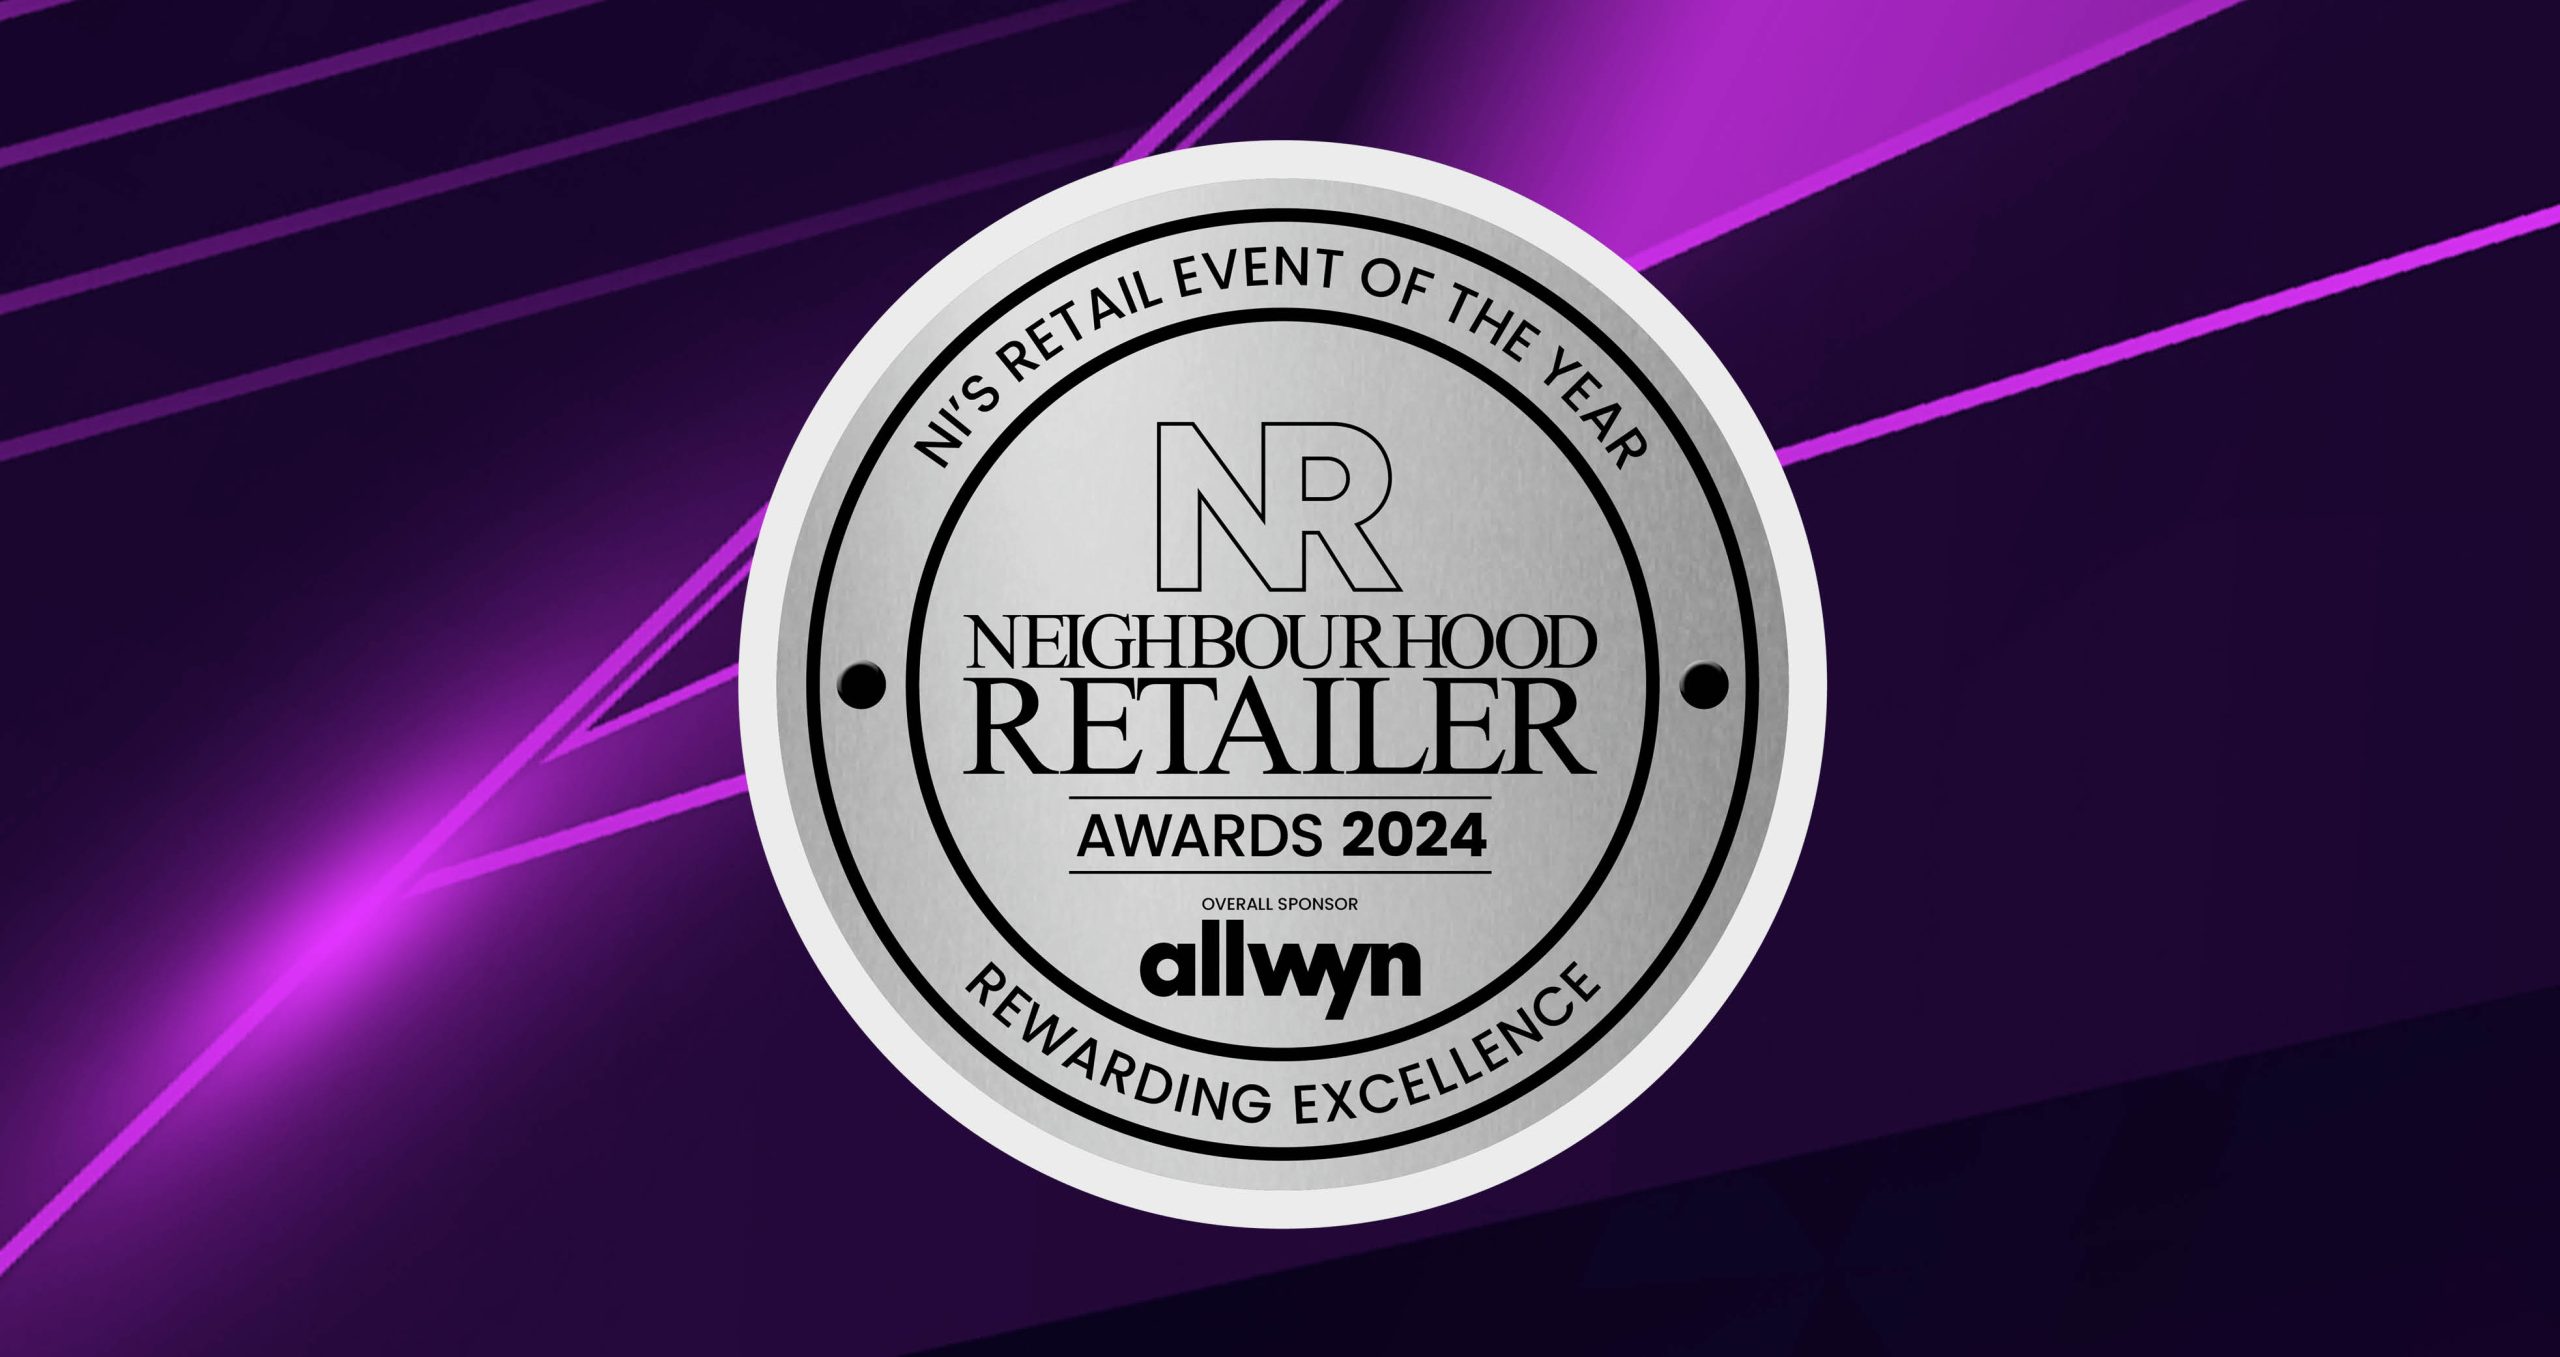 Get your entries in for the 2024 Neighbourhood Retailer Awards!